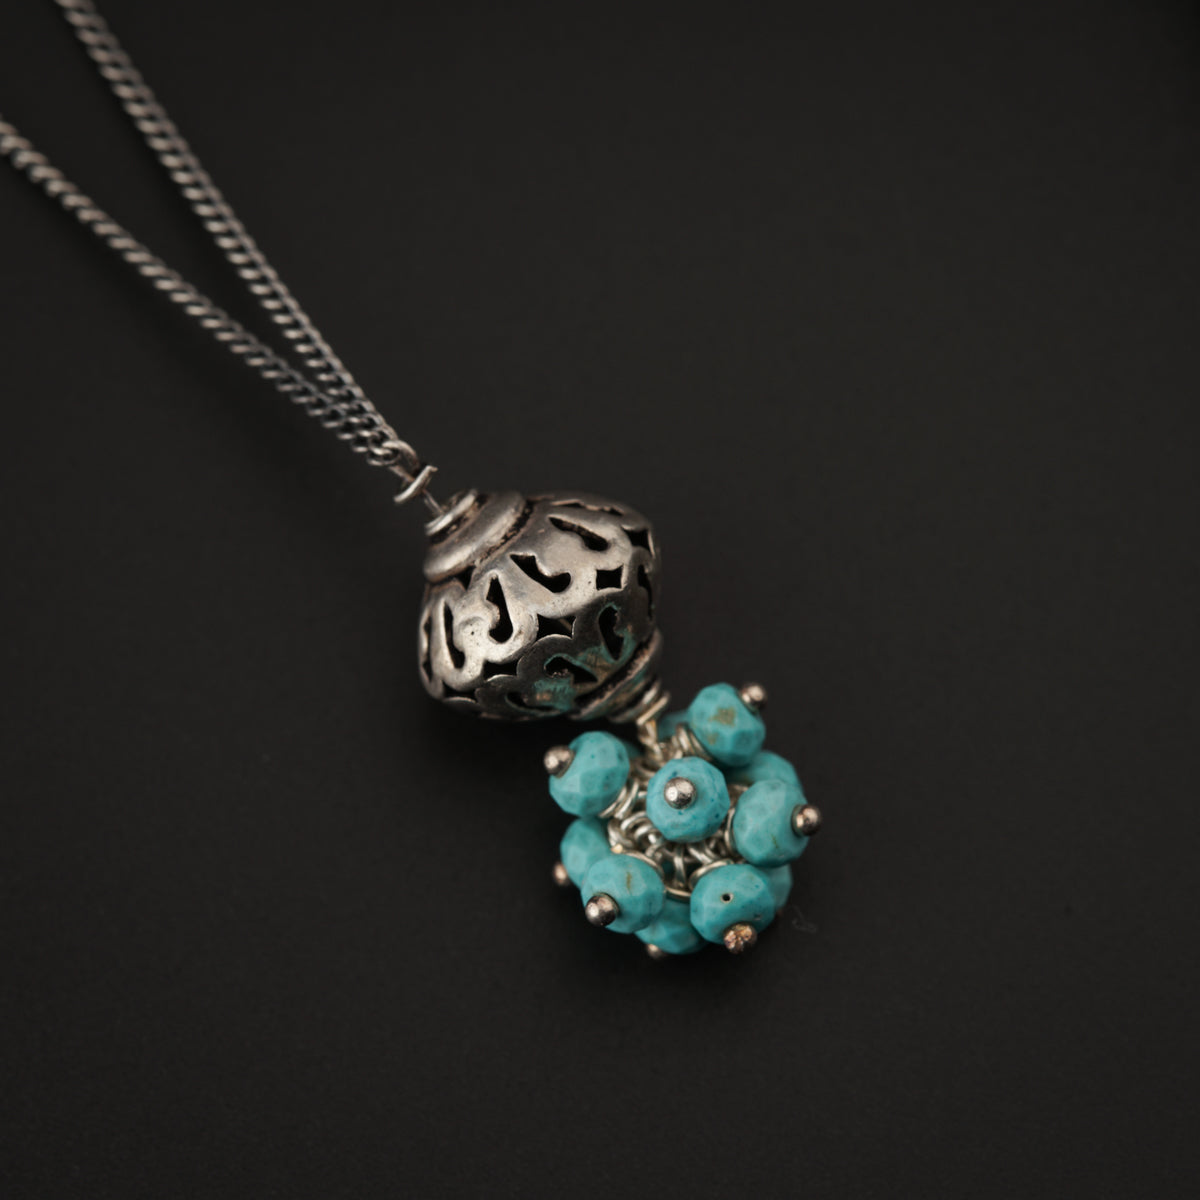 Oxidized Silver Filigree Necklace with Turquoise